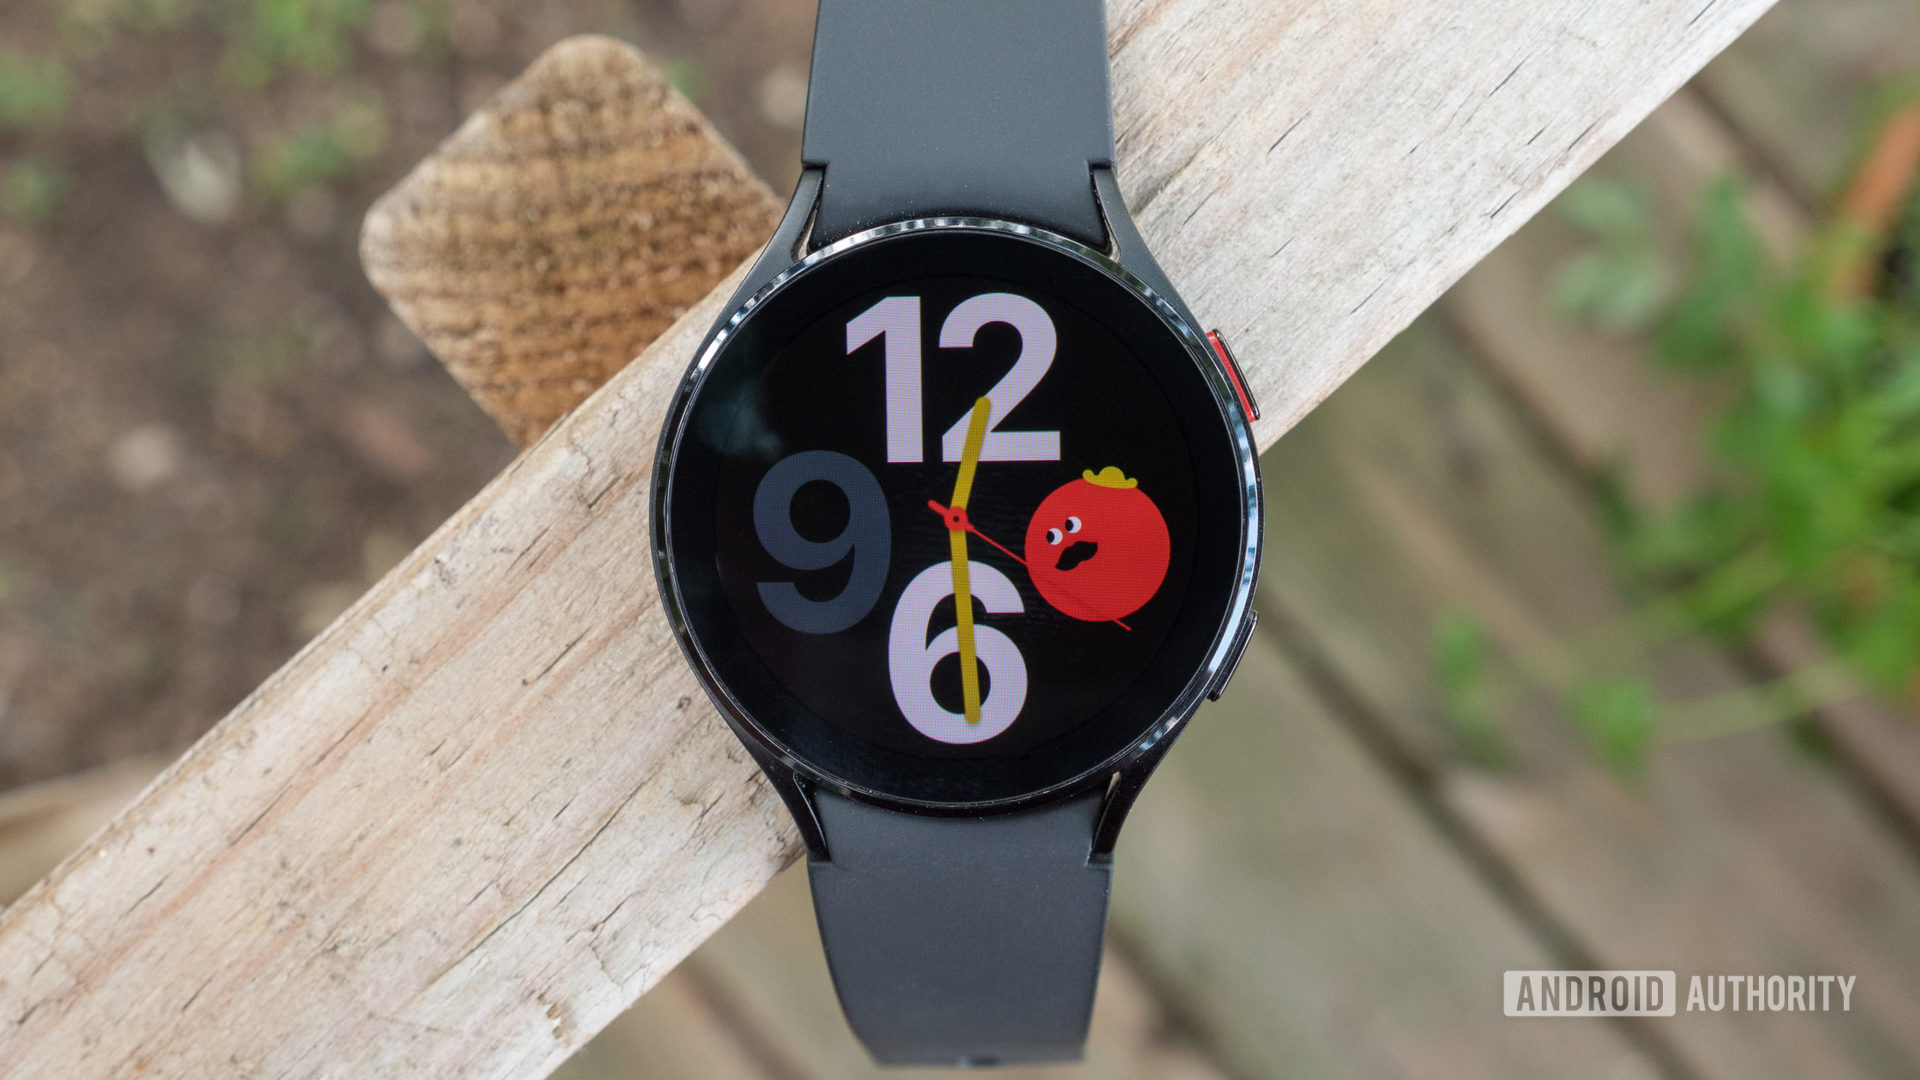 The samsung galaxy watch 4 on a fence showing the watch face